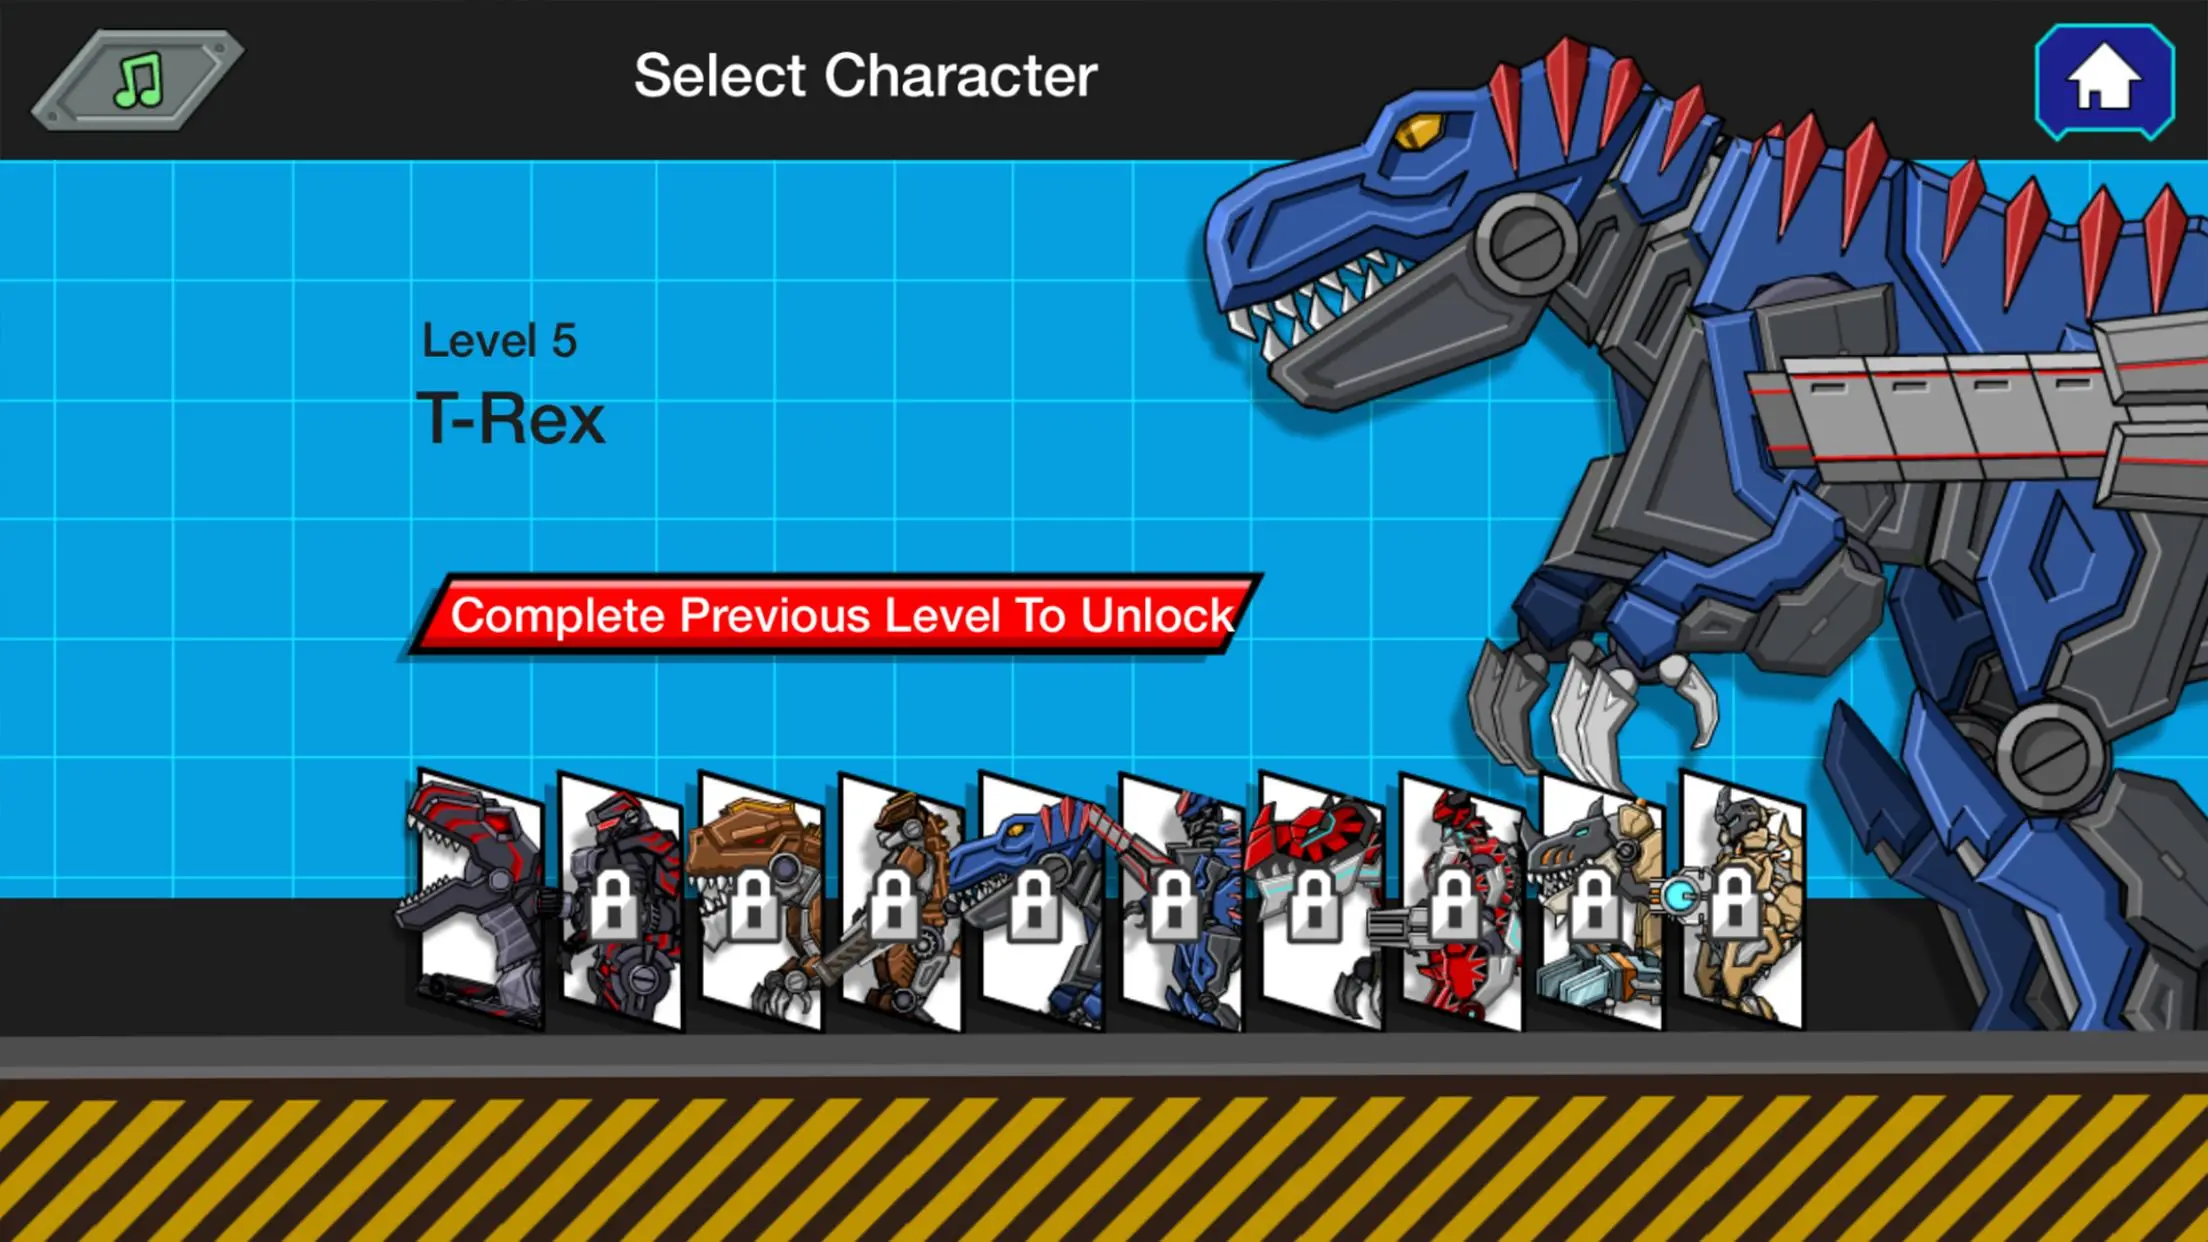 Download Robot Dino T-Rex Attack android on PC